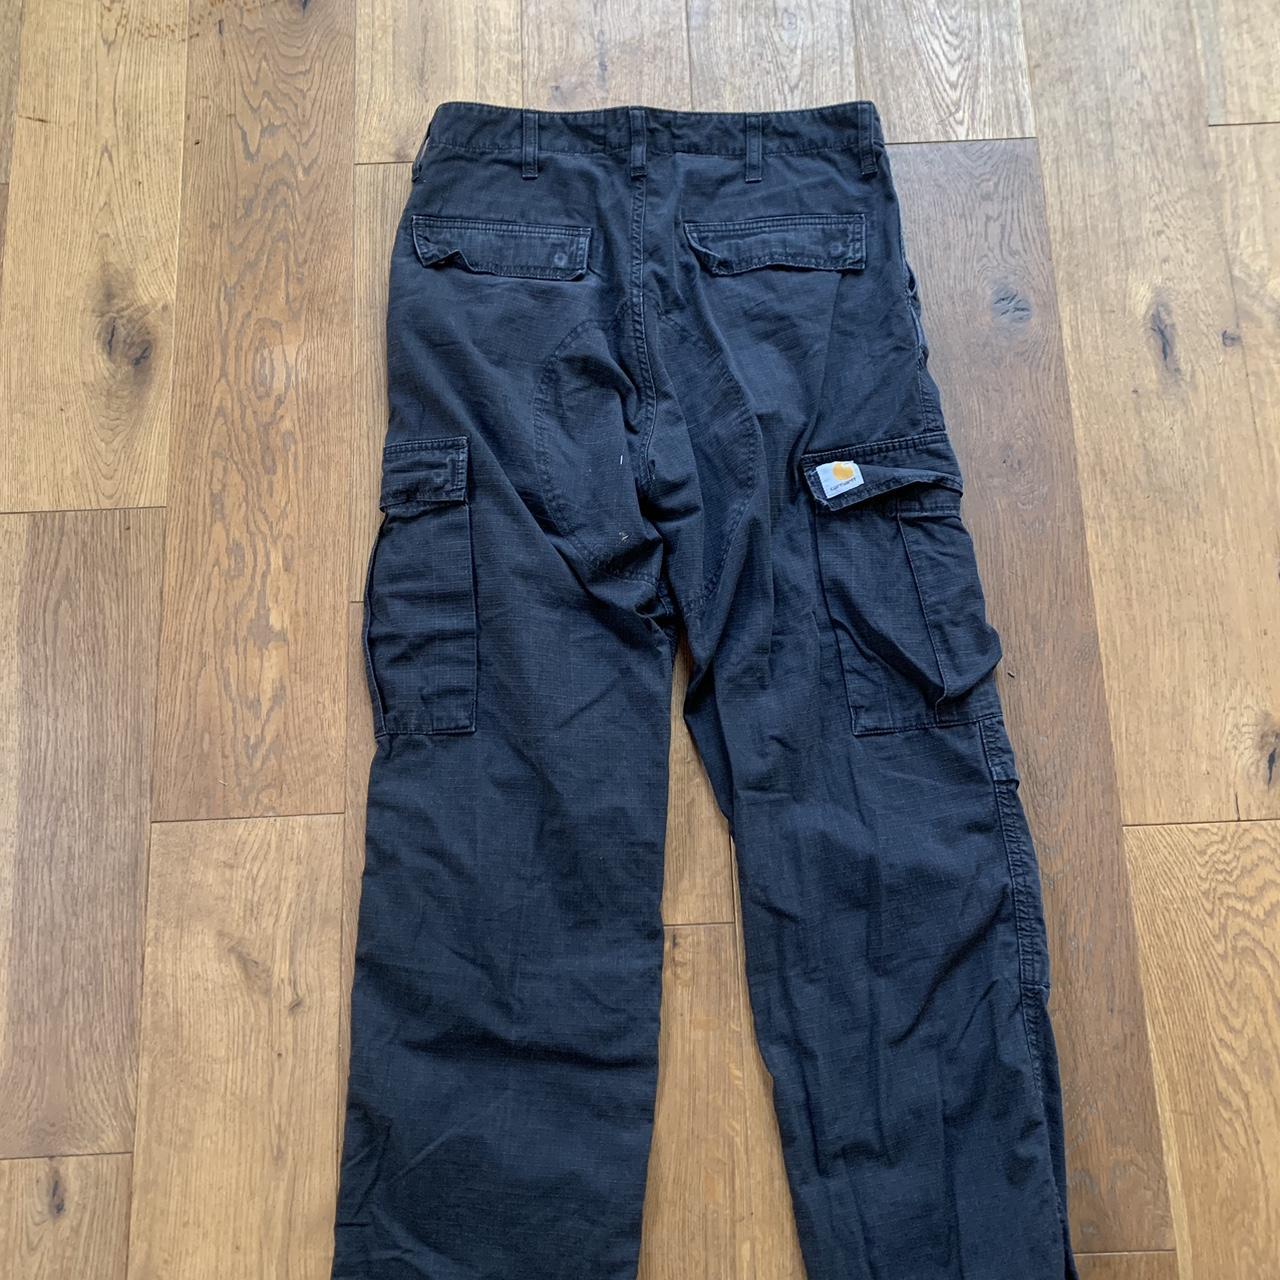 Vintage carhaart cargo trousers. Good condition but... - Depop